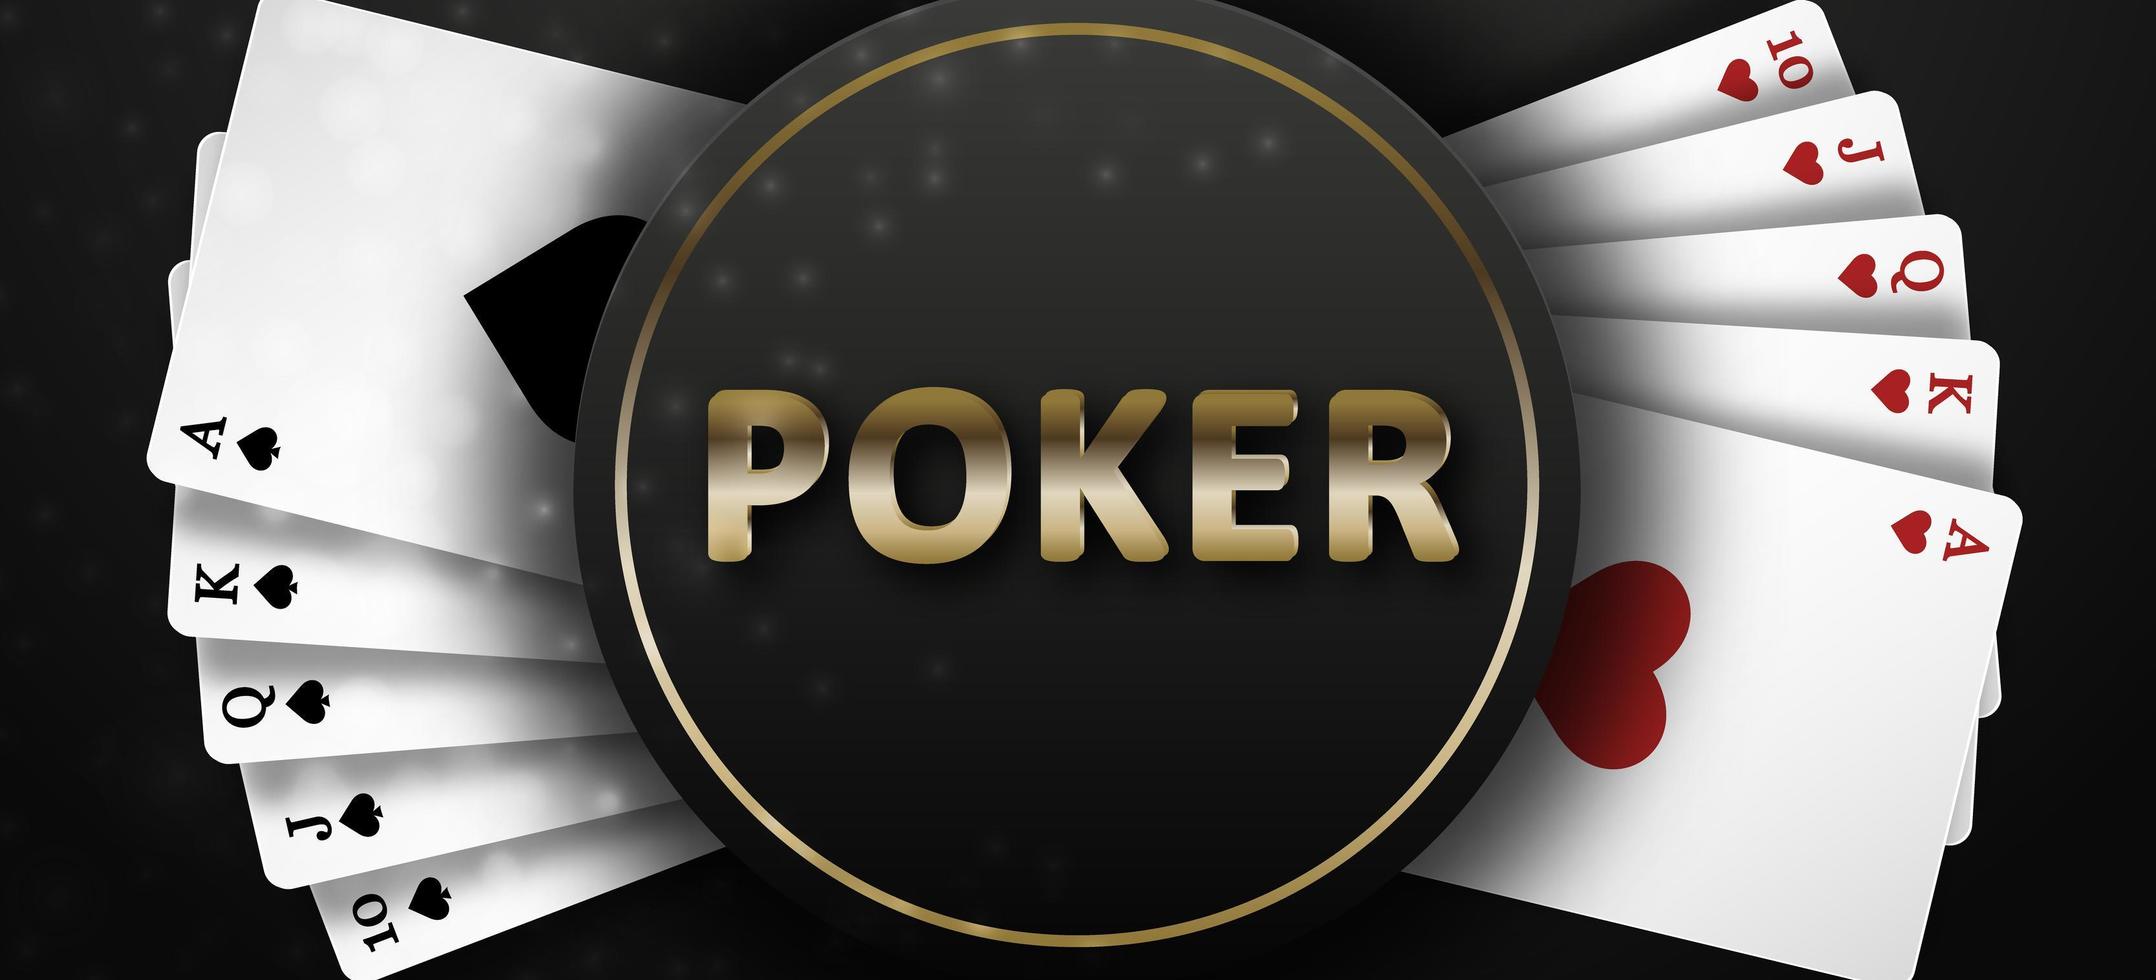 Poker on a black background and royal flush of the suit of hearts and spades. Background for casino advertising, poker, gambling. Vector illustration.